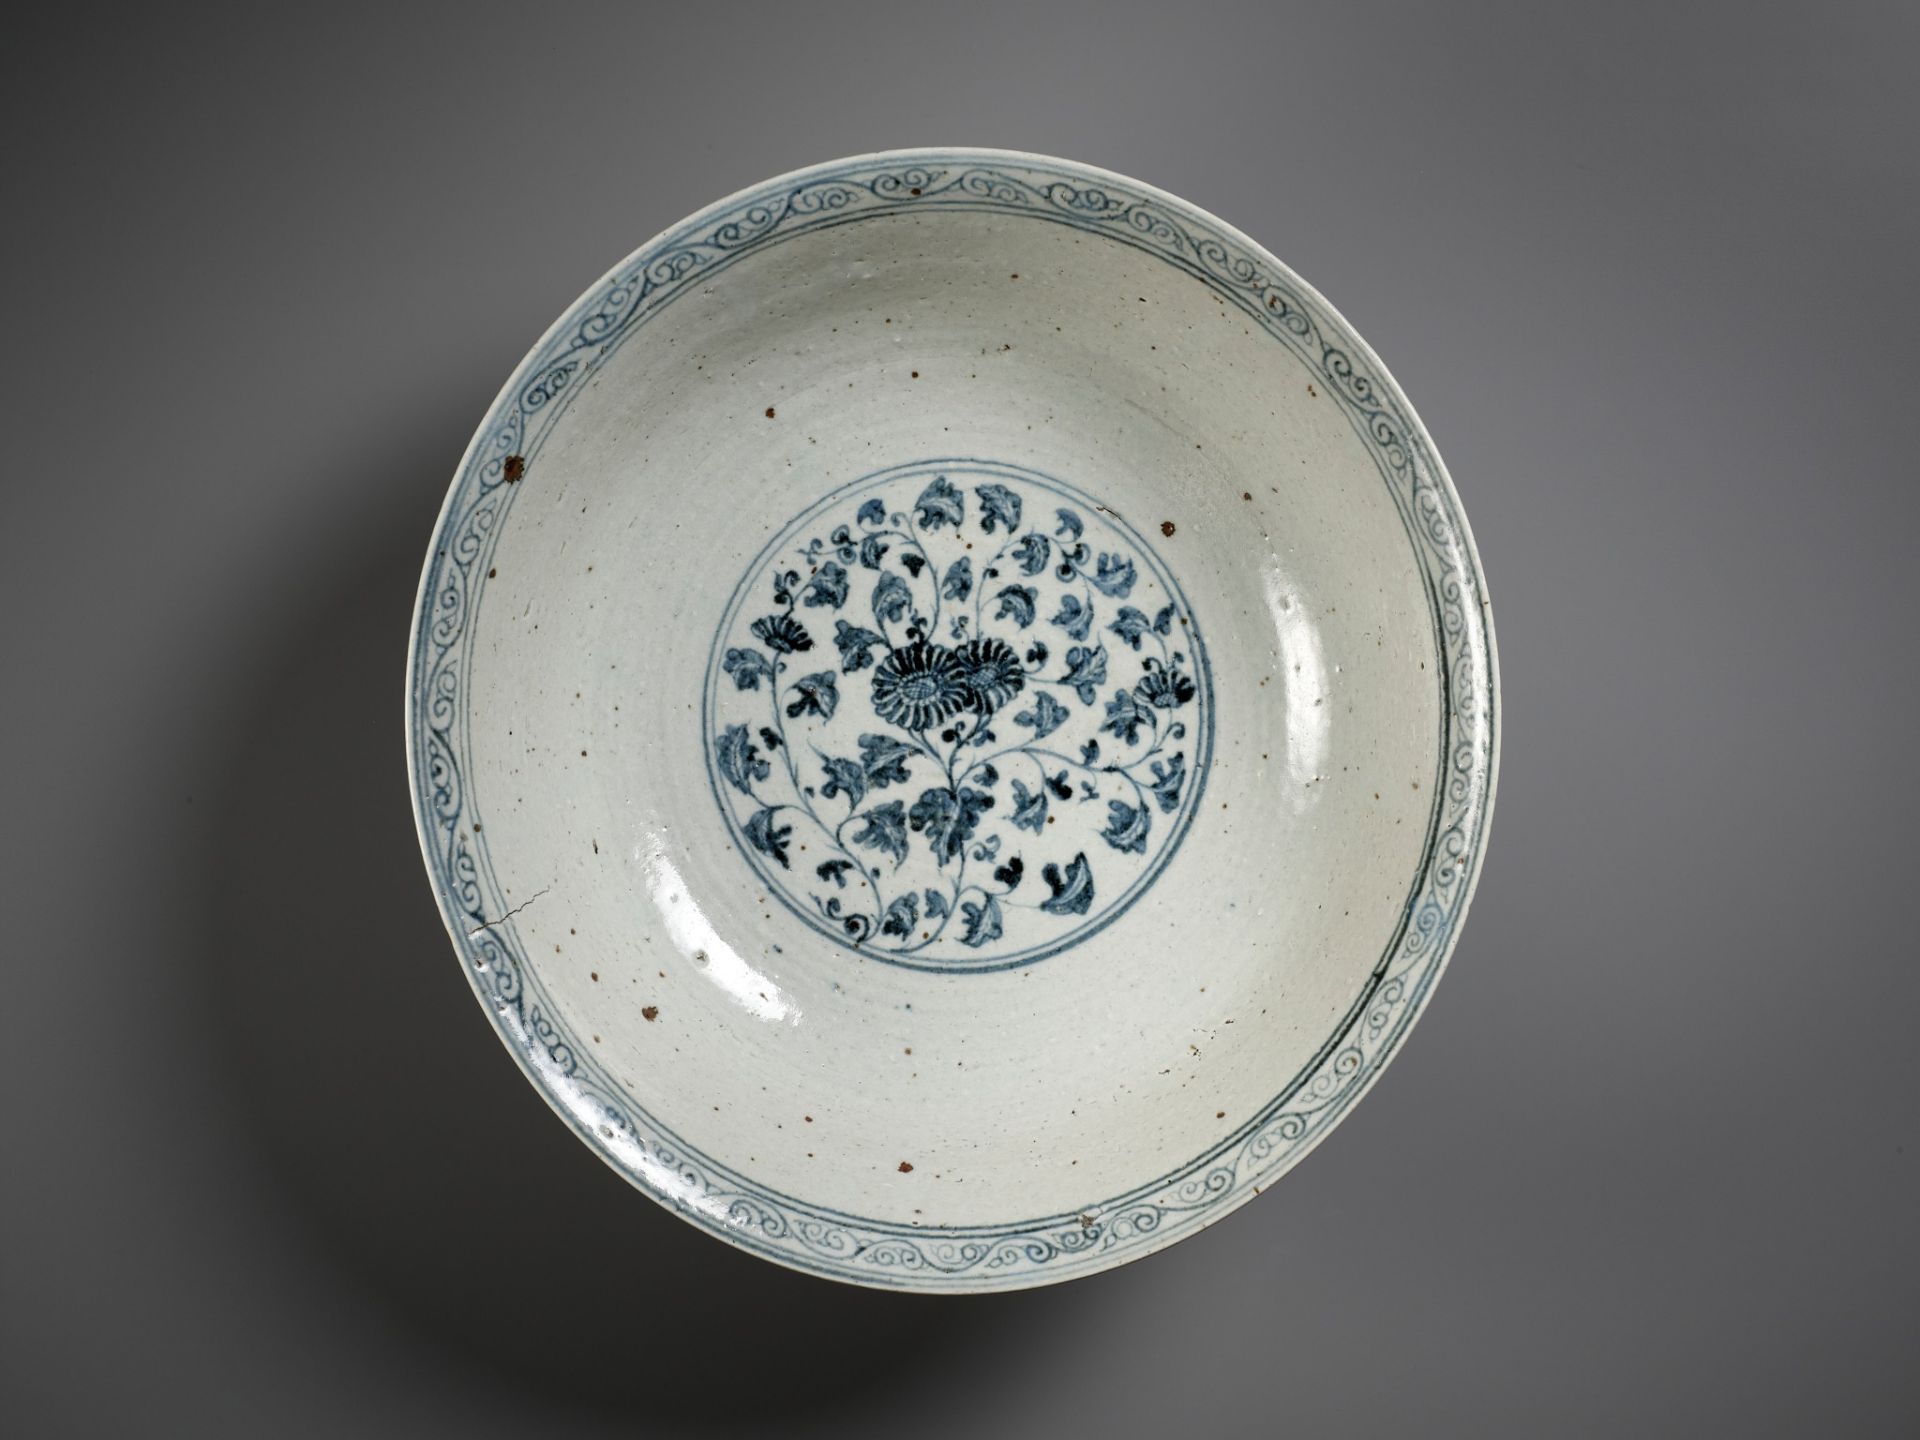 A LARGE ANNAMESE BLUE AND WHITE BOWL, VIETNAM, 14TH-15TH CENTURY - Image 2 of 12